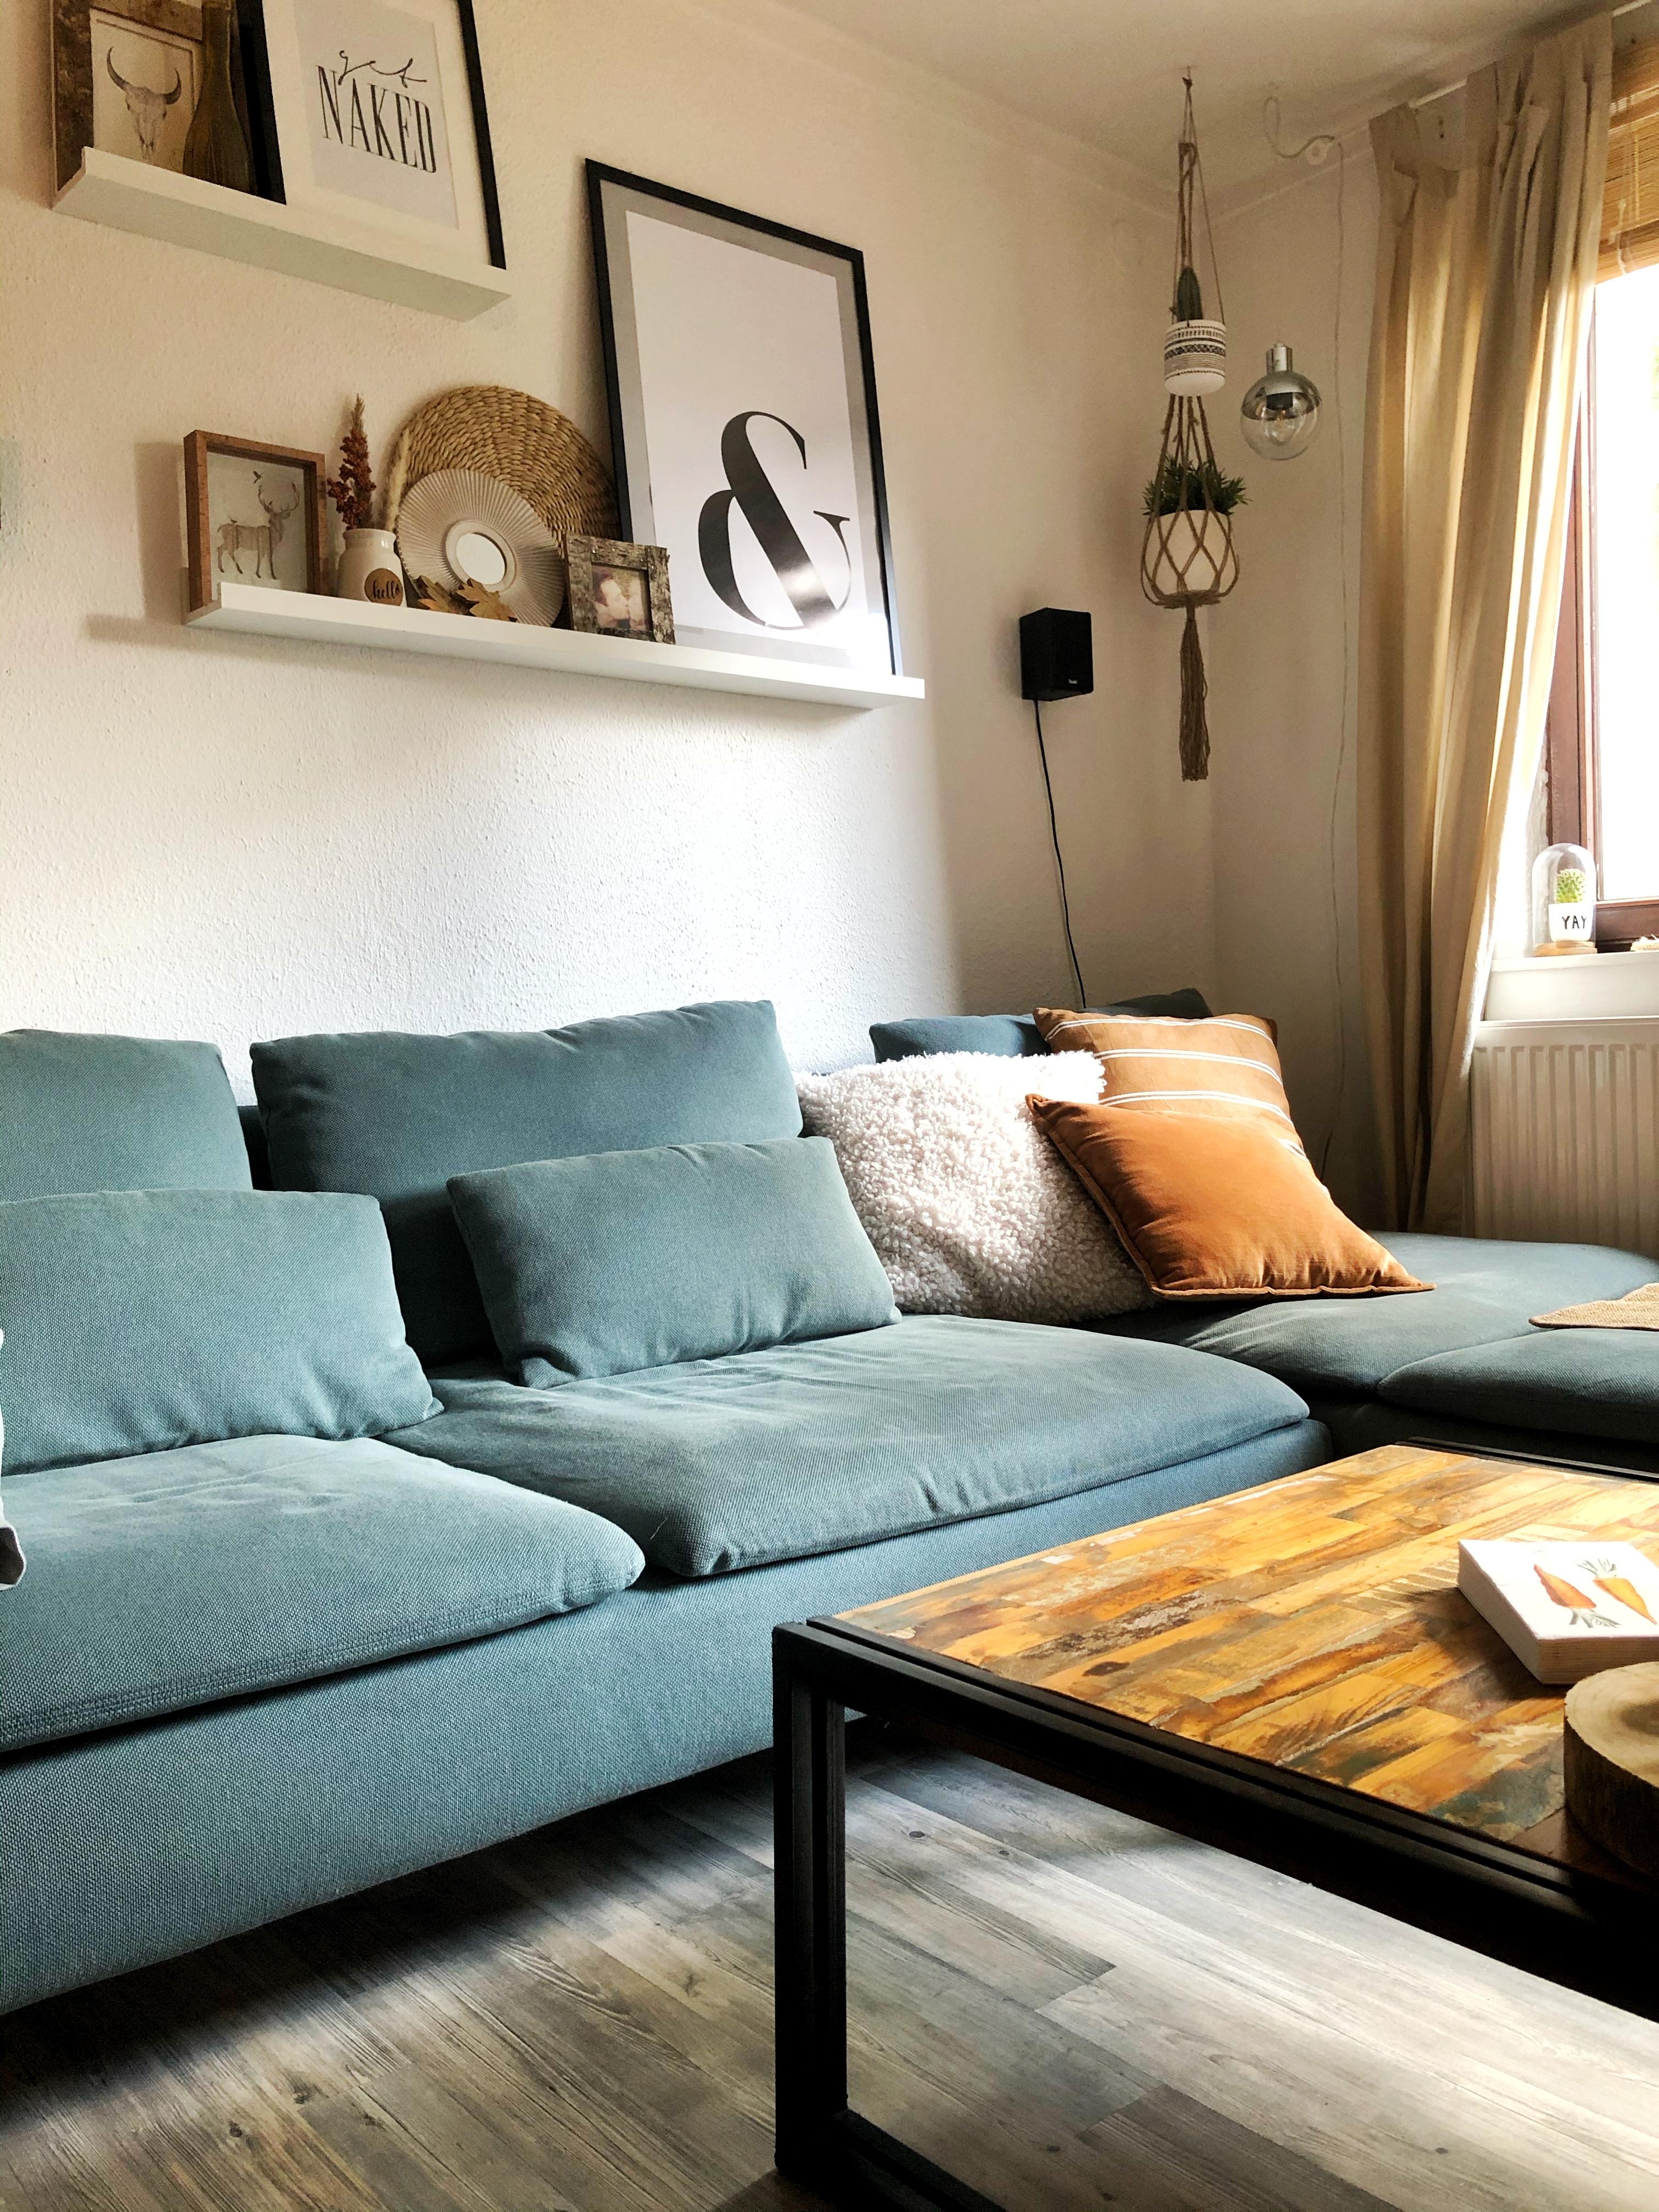 Ab aufs Lieblings Sofa ❤️ #livingroom#cozyhome#hygge#couchmagazin#couchstyle#meinikea